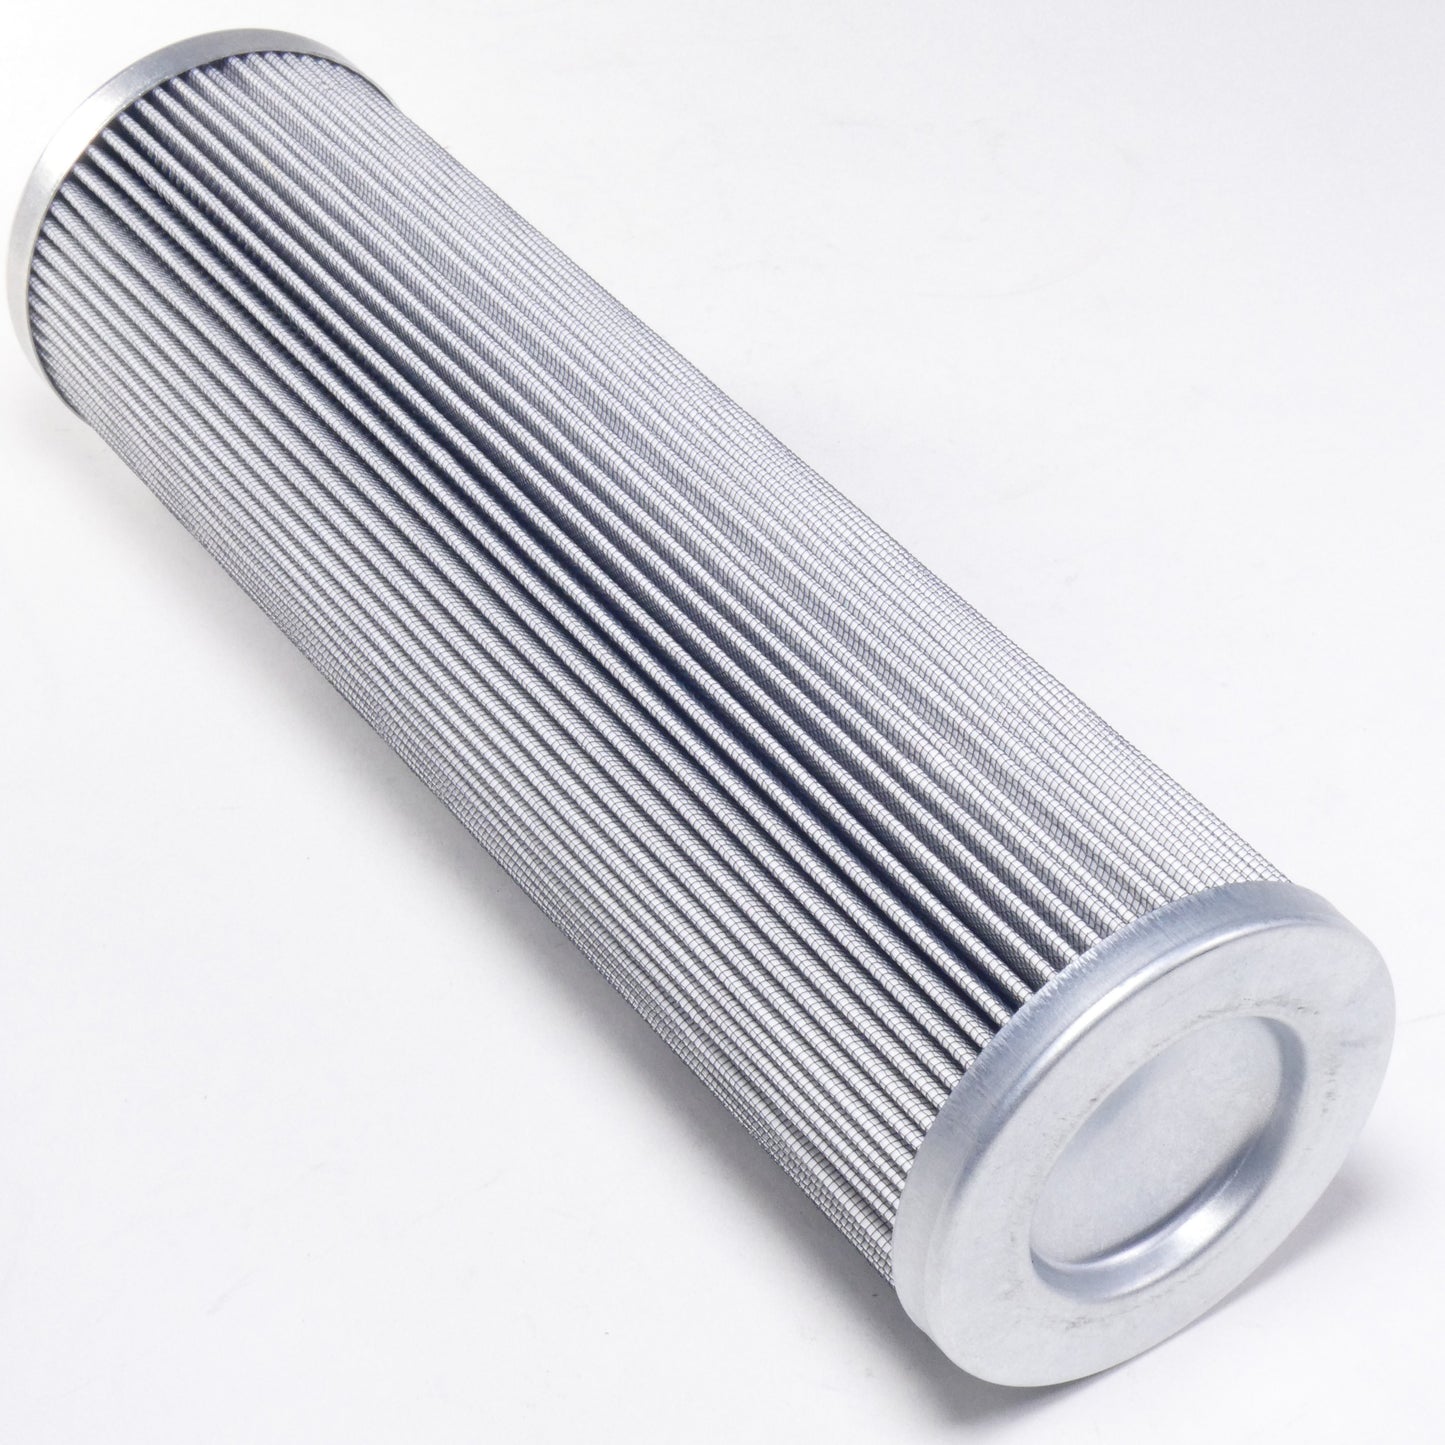 Hydrafil Replacement Filter Element for Hycoa V134-0010-V-1